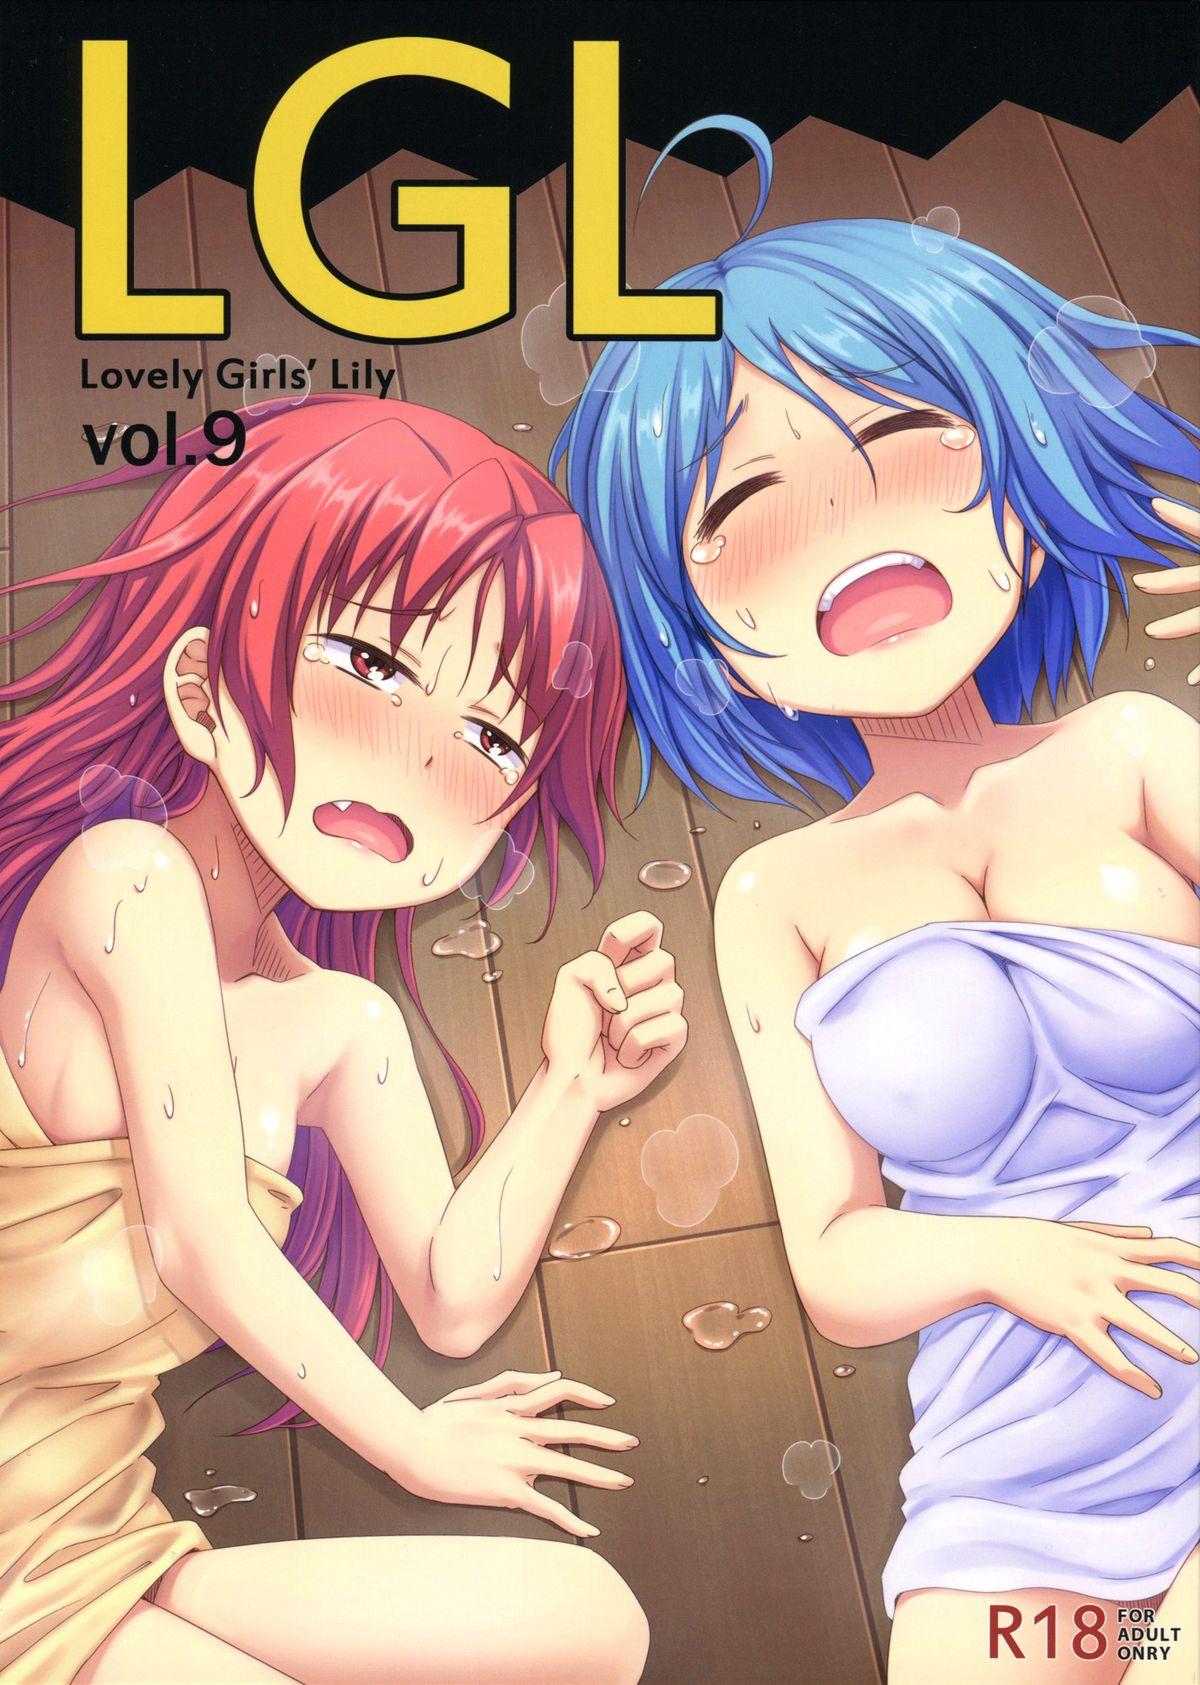 Caliente Lovely Girls' Lily Vol. 9 - Puella magi madoka magica Transsexual - Picture 1